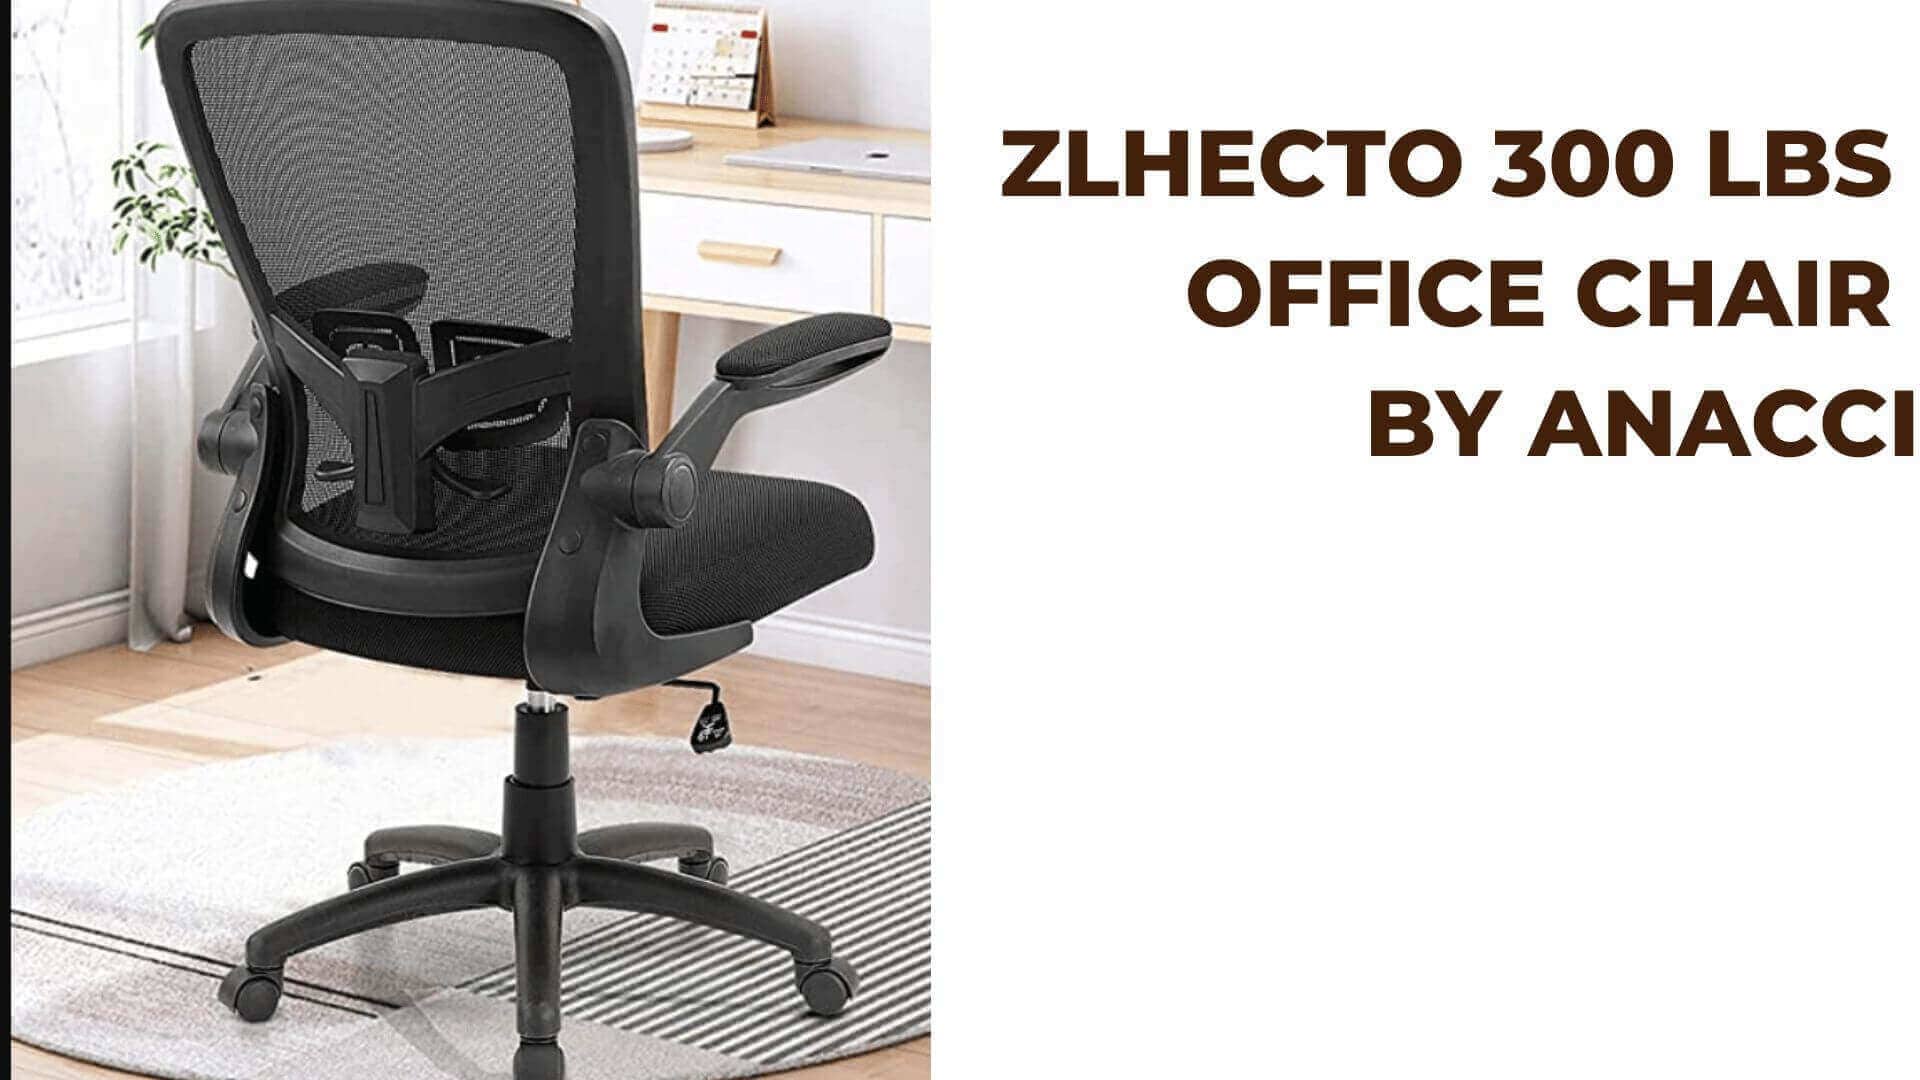 ZLHECTO 300 lbs office chair by ANACCI